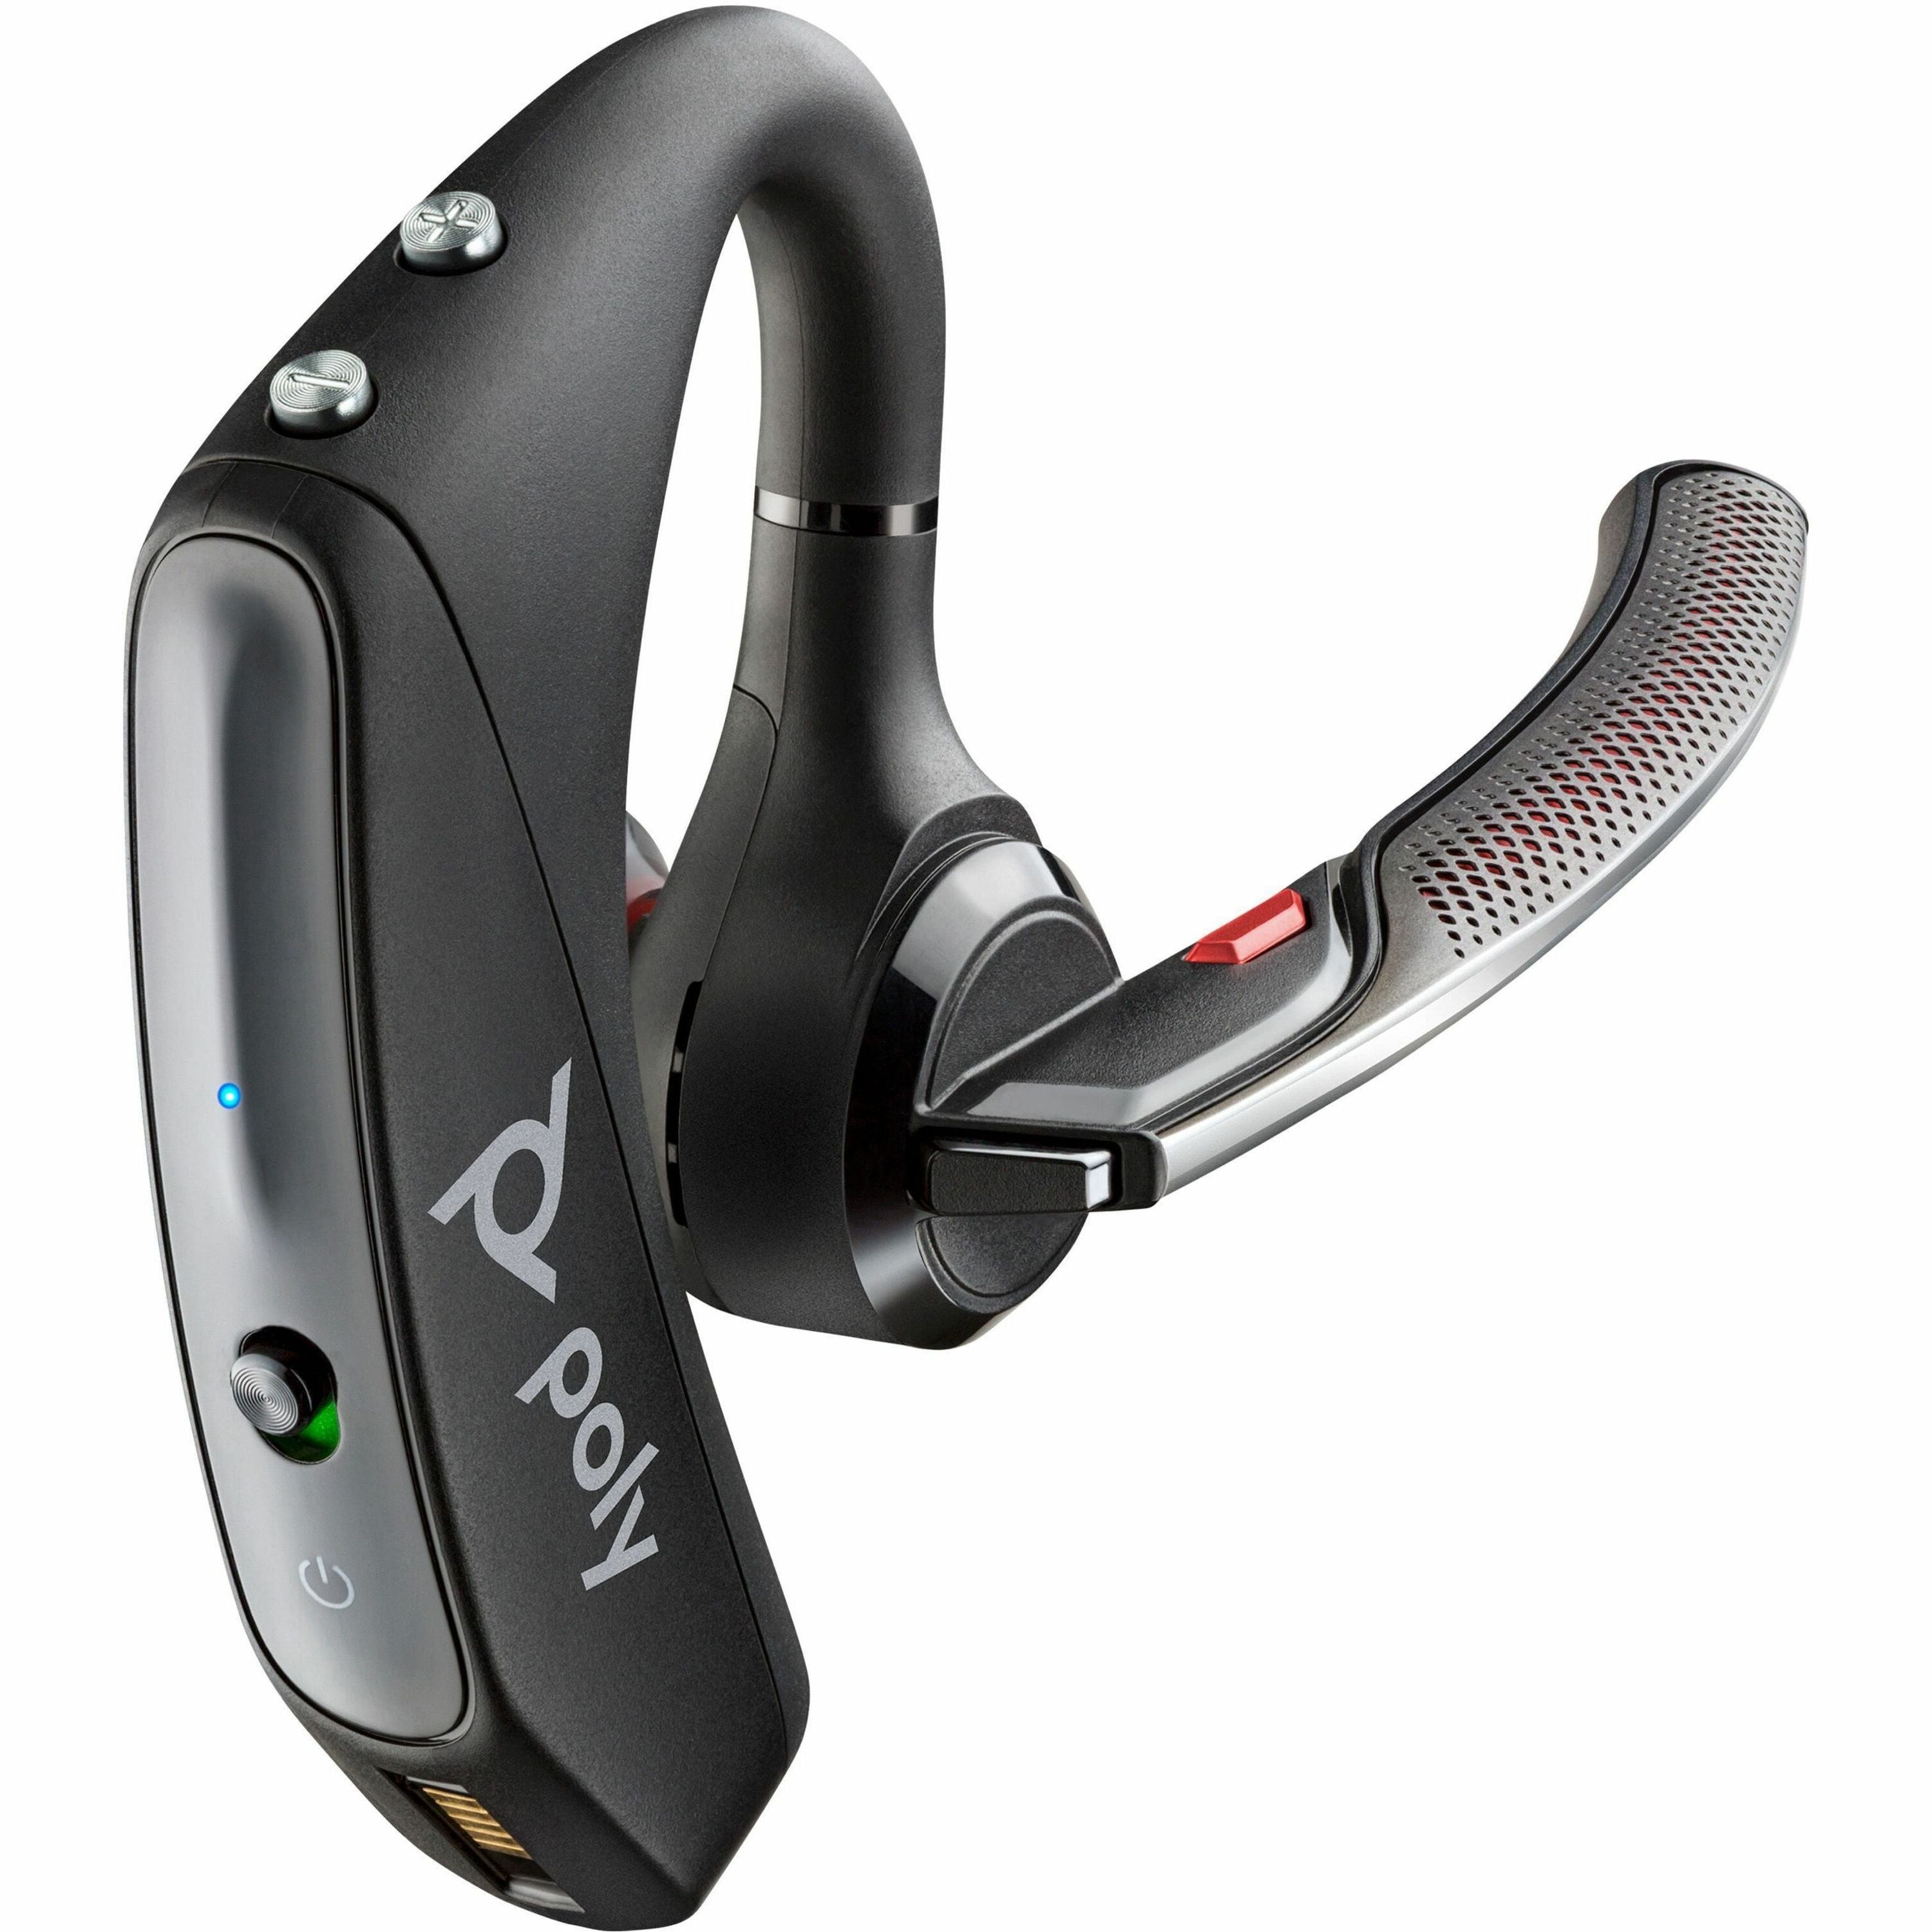 poly-voyager-5200-office-headset-siri-google-assistantusb-type-a-rj-11-wireless-bluetooth-2461-ft-32-ohm-100-hz-20-khz-monaural-in-ear-noise-cancelling-omni-directional-mems-technology-microphone-noise-canceling-black-t_hew7w6d2aa - 1